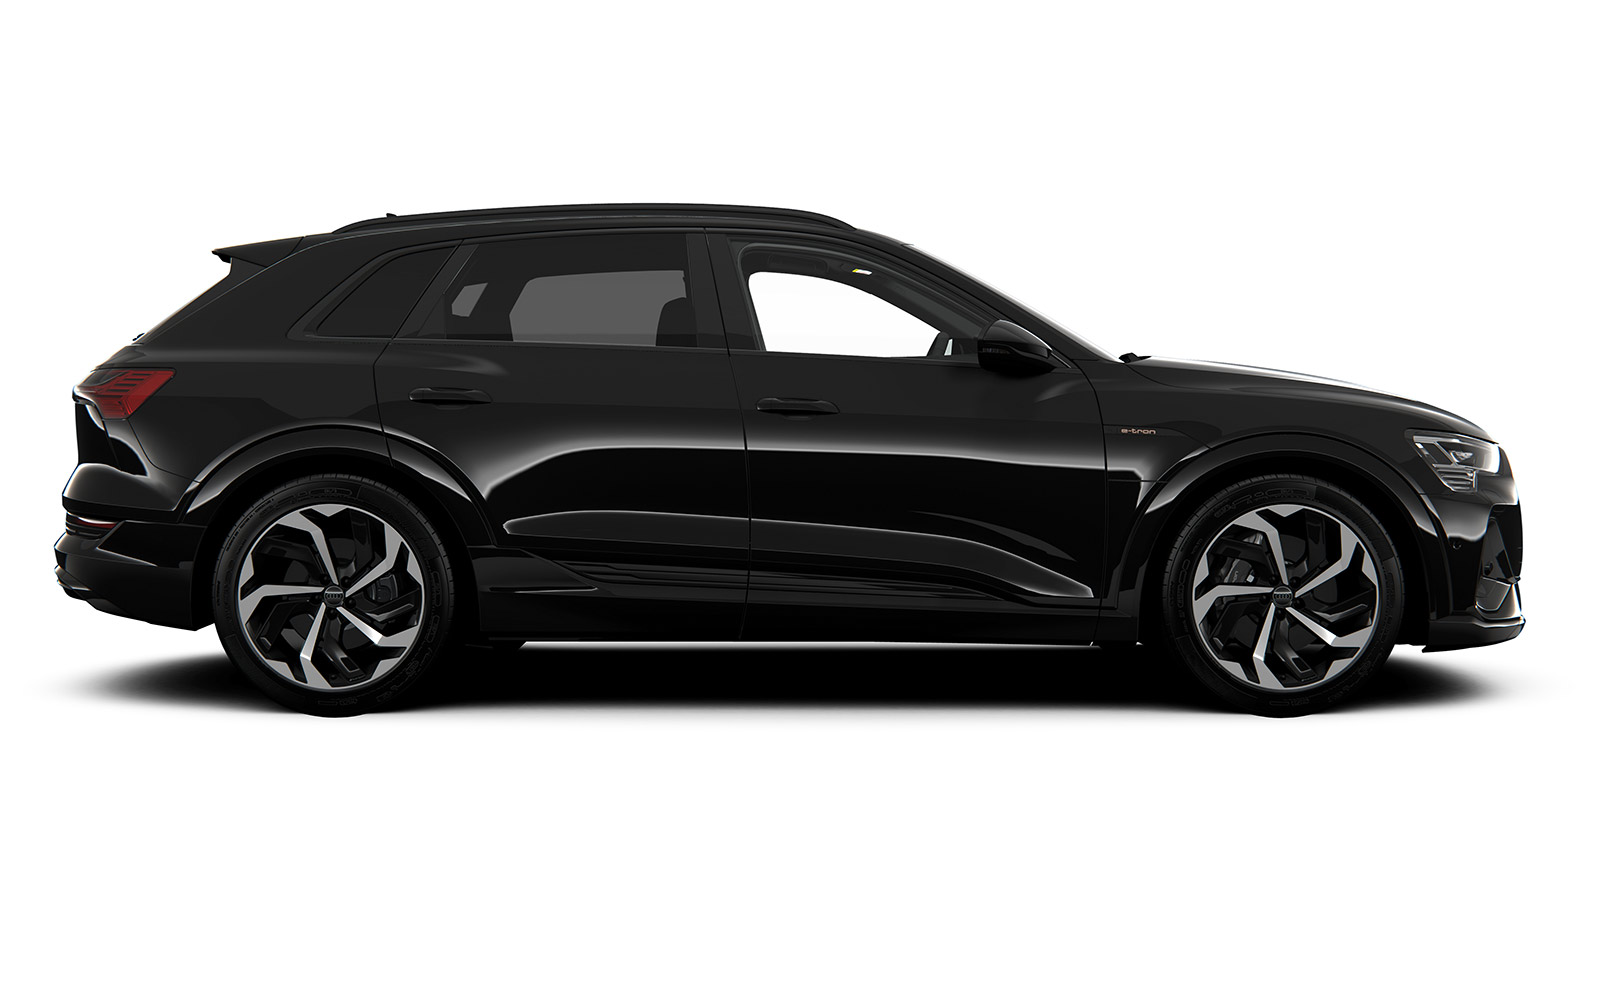 New Black Edition Headlines etron Lineup Improvements & Expansion in